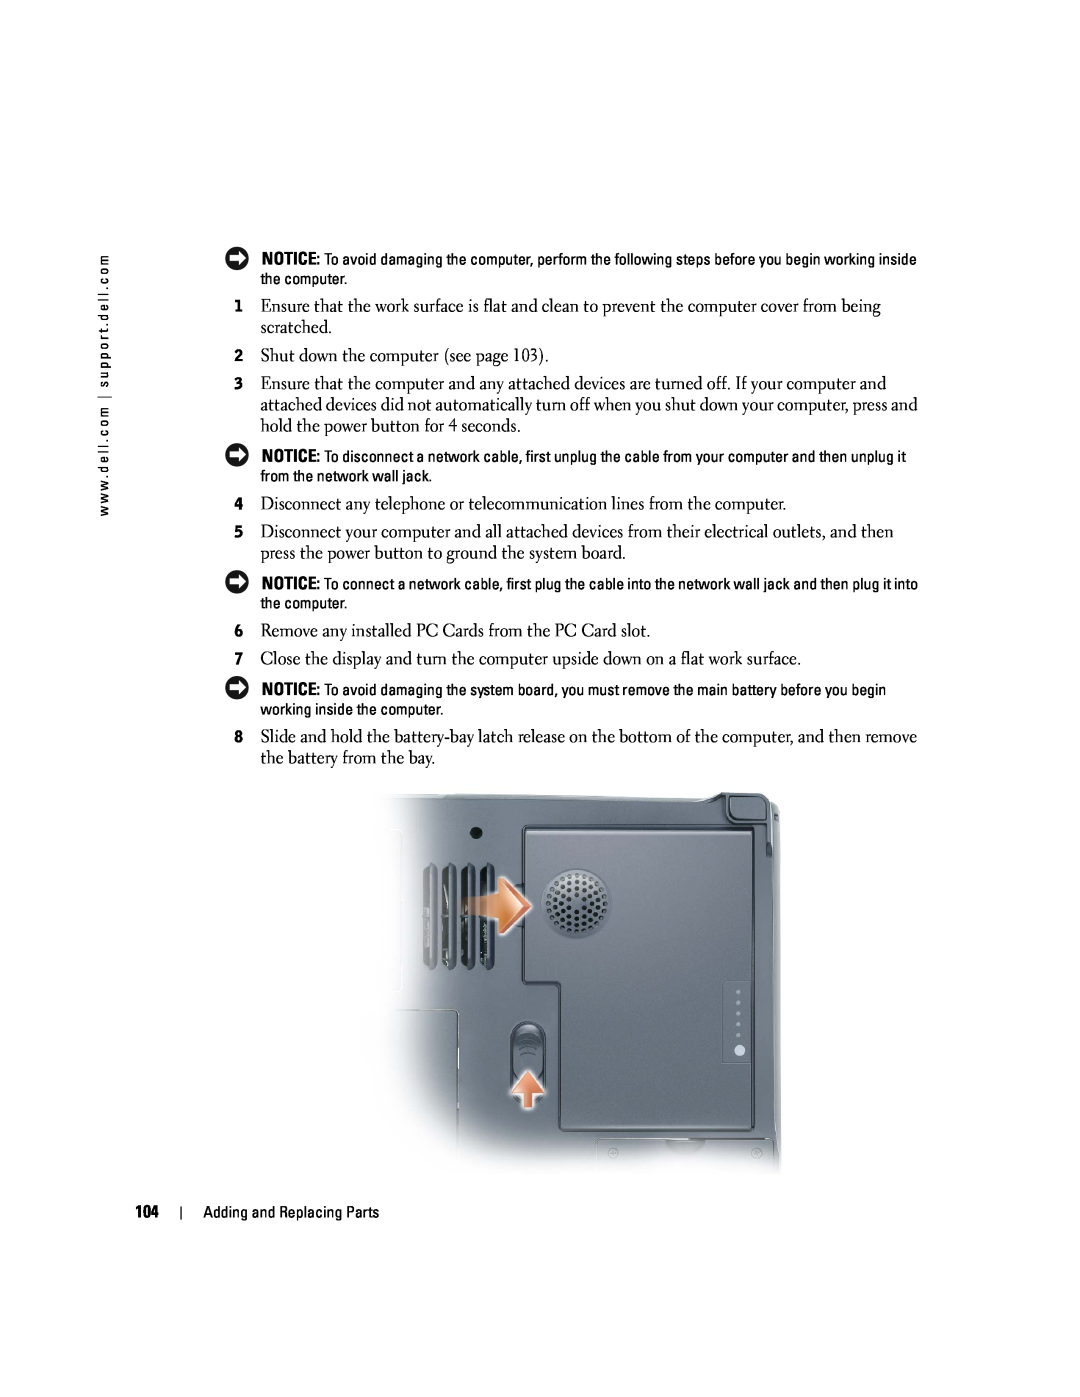 Dell PP09L owner manual Shut down the computer see page 